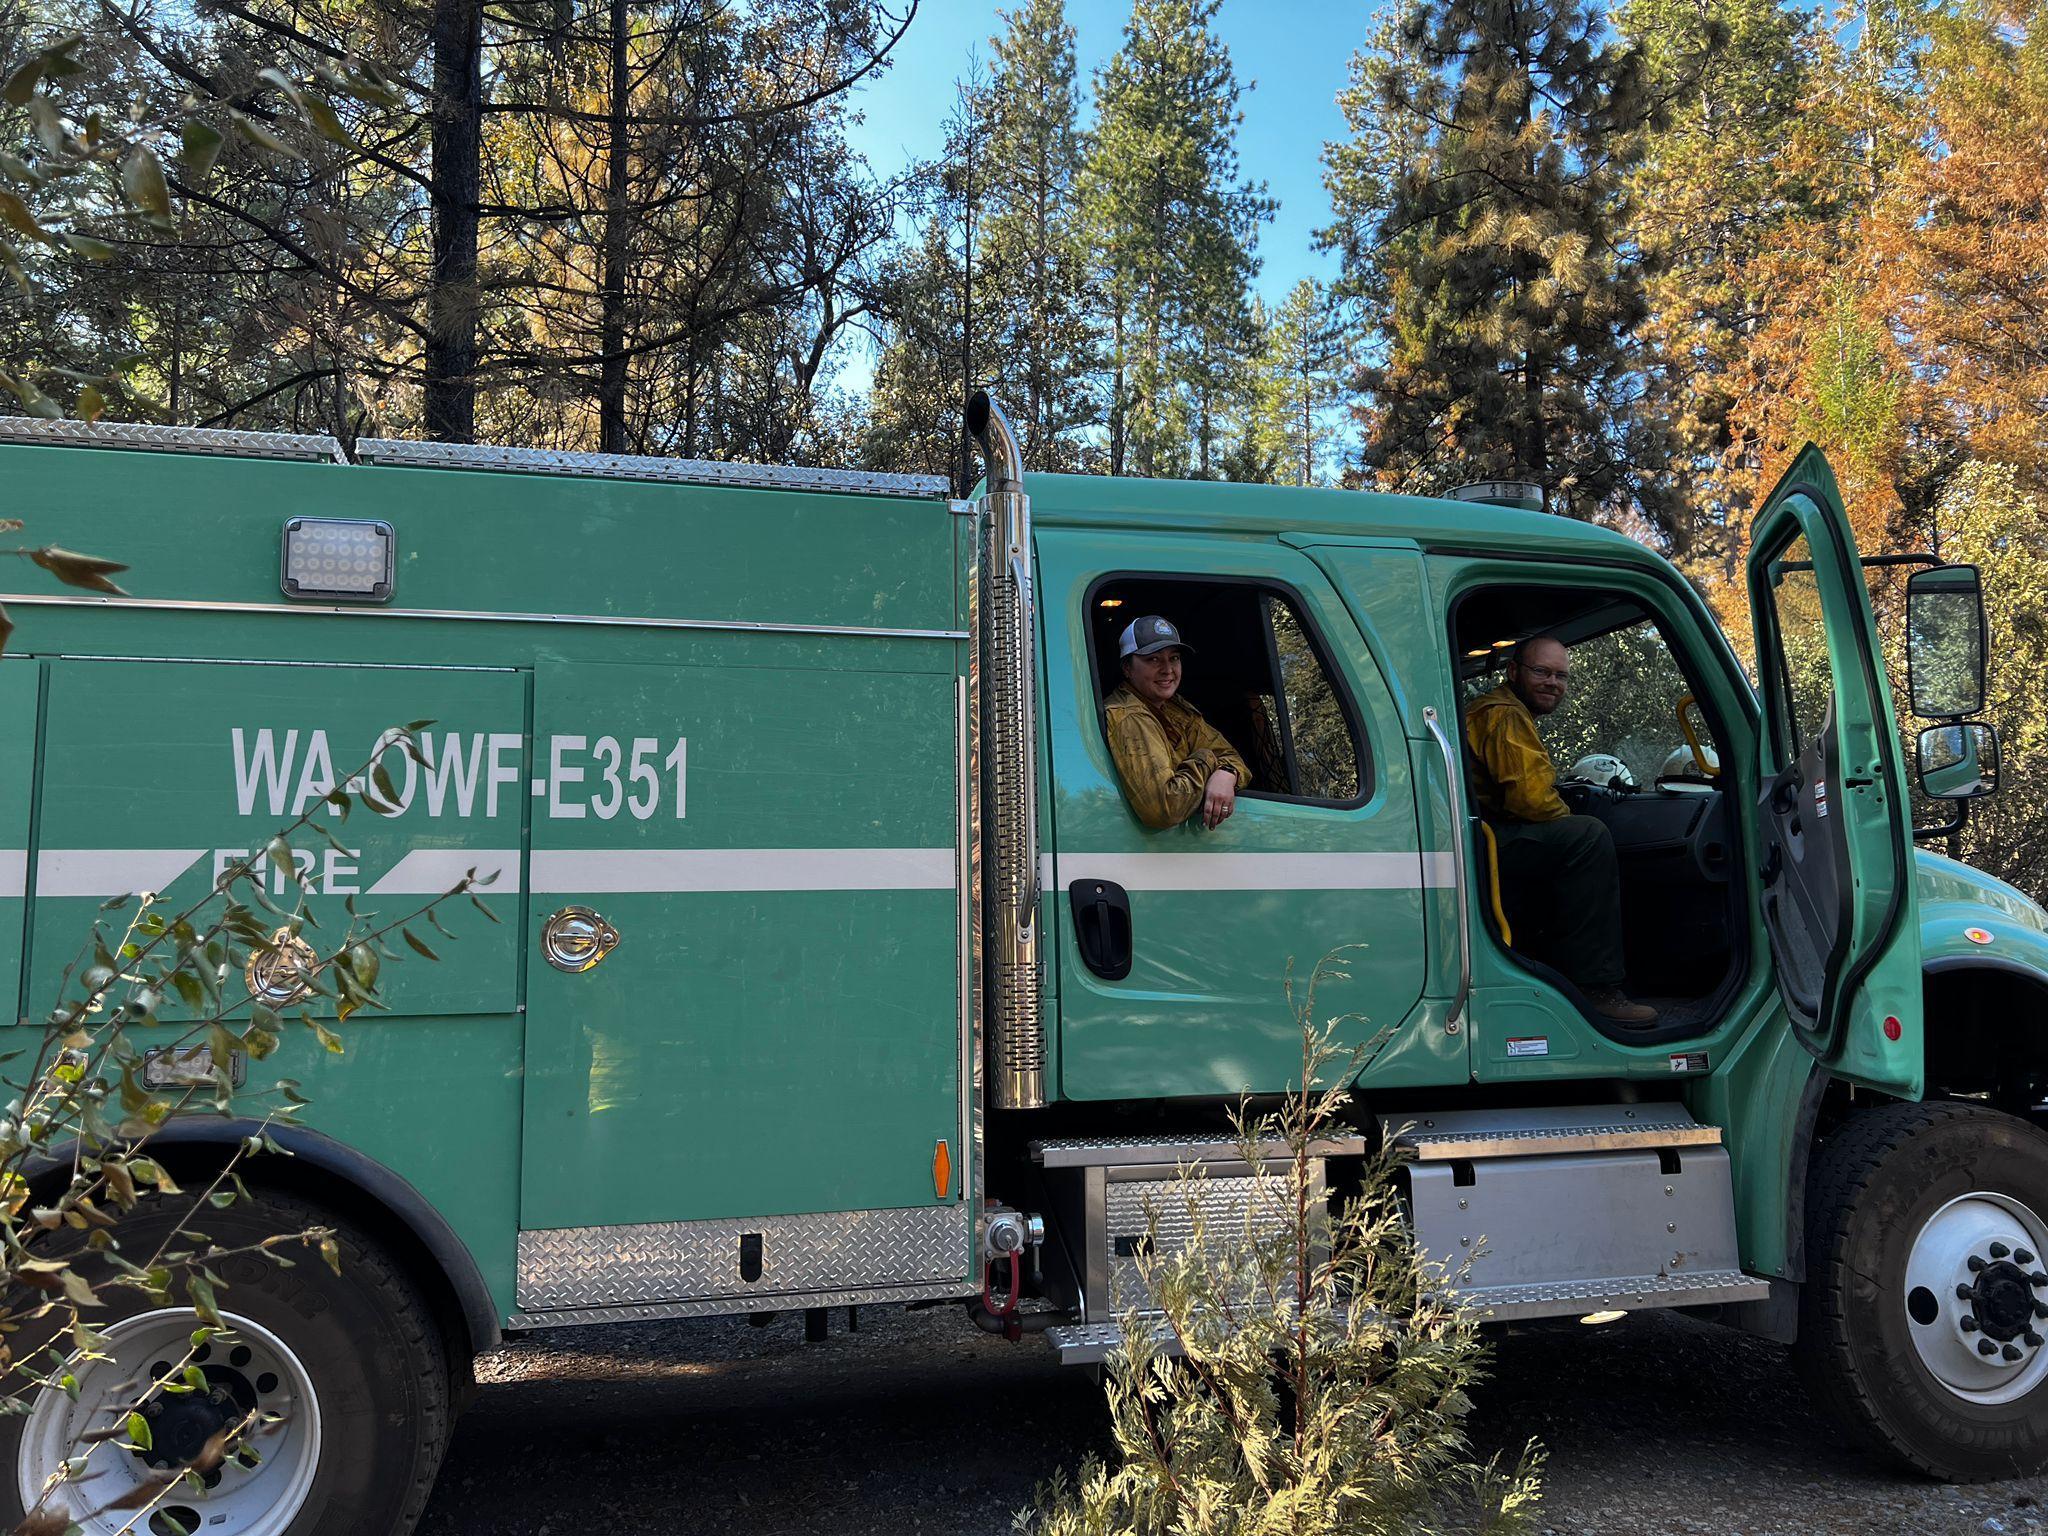 On a gravel road next to burned trees, a male and a female firefighter smile for the photographer from their green Forest Service firefighting engine